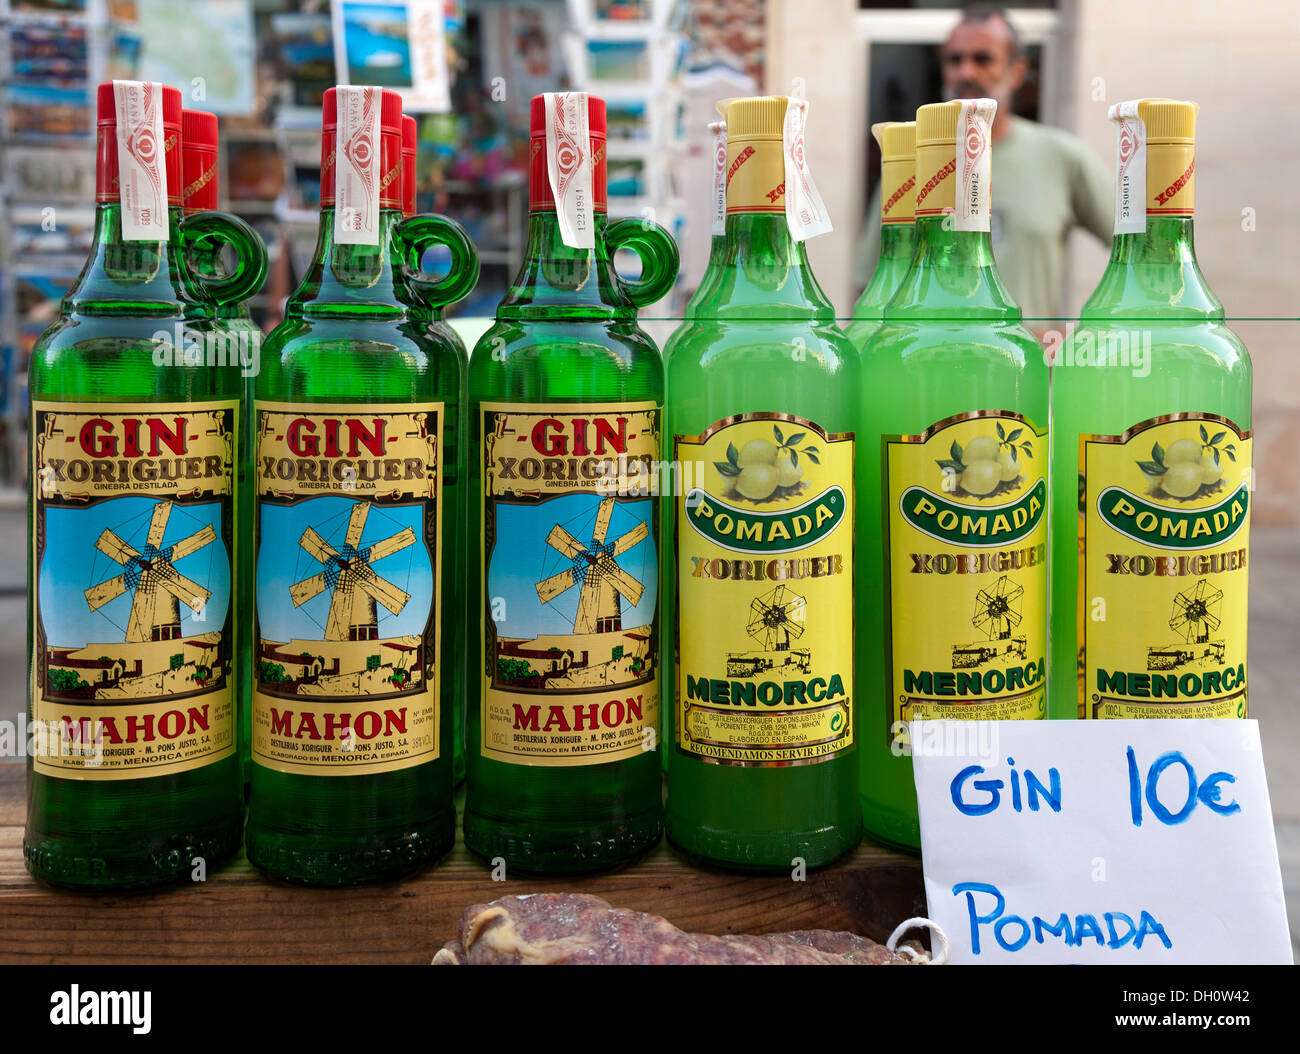 Gin and pomada, typical alcoholic drinks of Menorca, Balearic Islands, Spain, Southern Europe, Europe Stock Photo